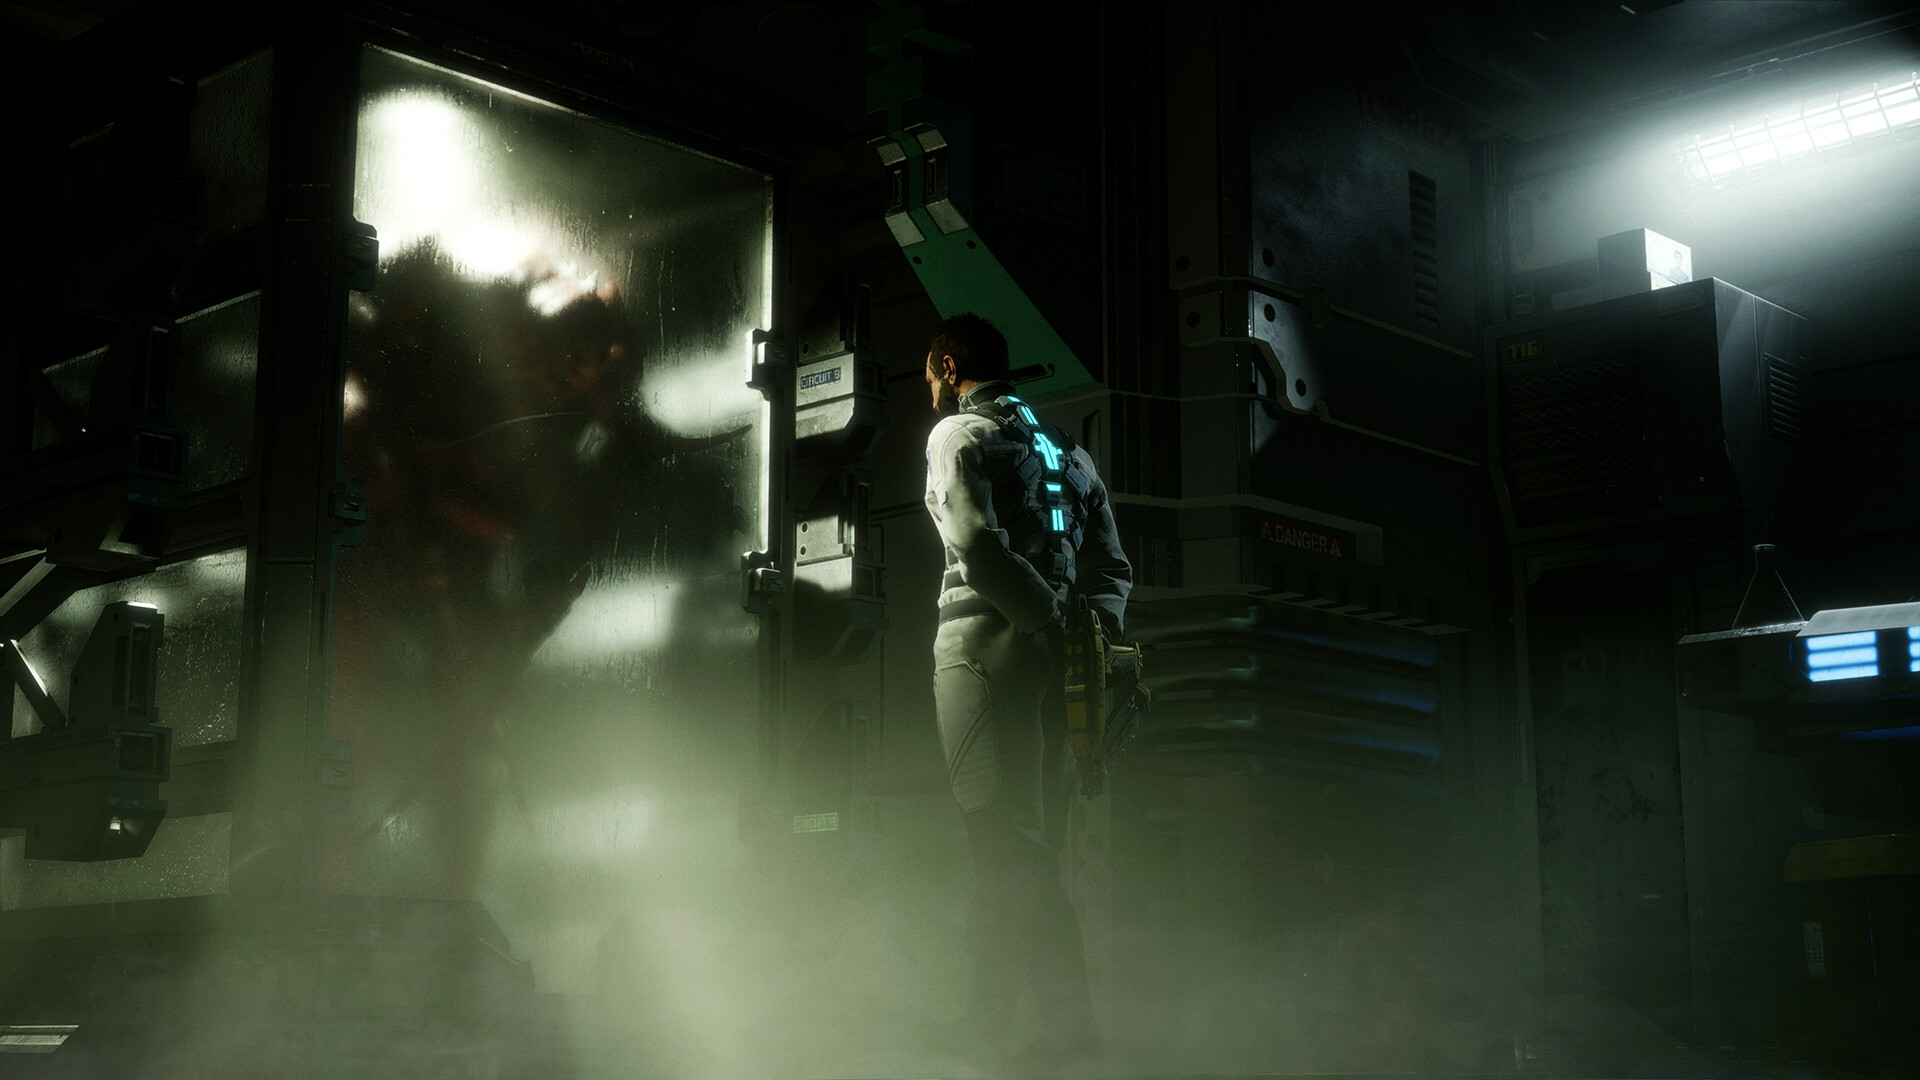 Electronic Arts - Dead Space, Remake of theSci-Fi Survival Horror